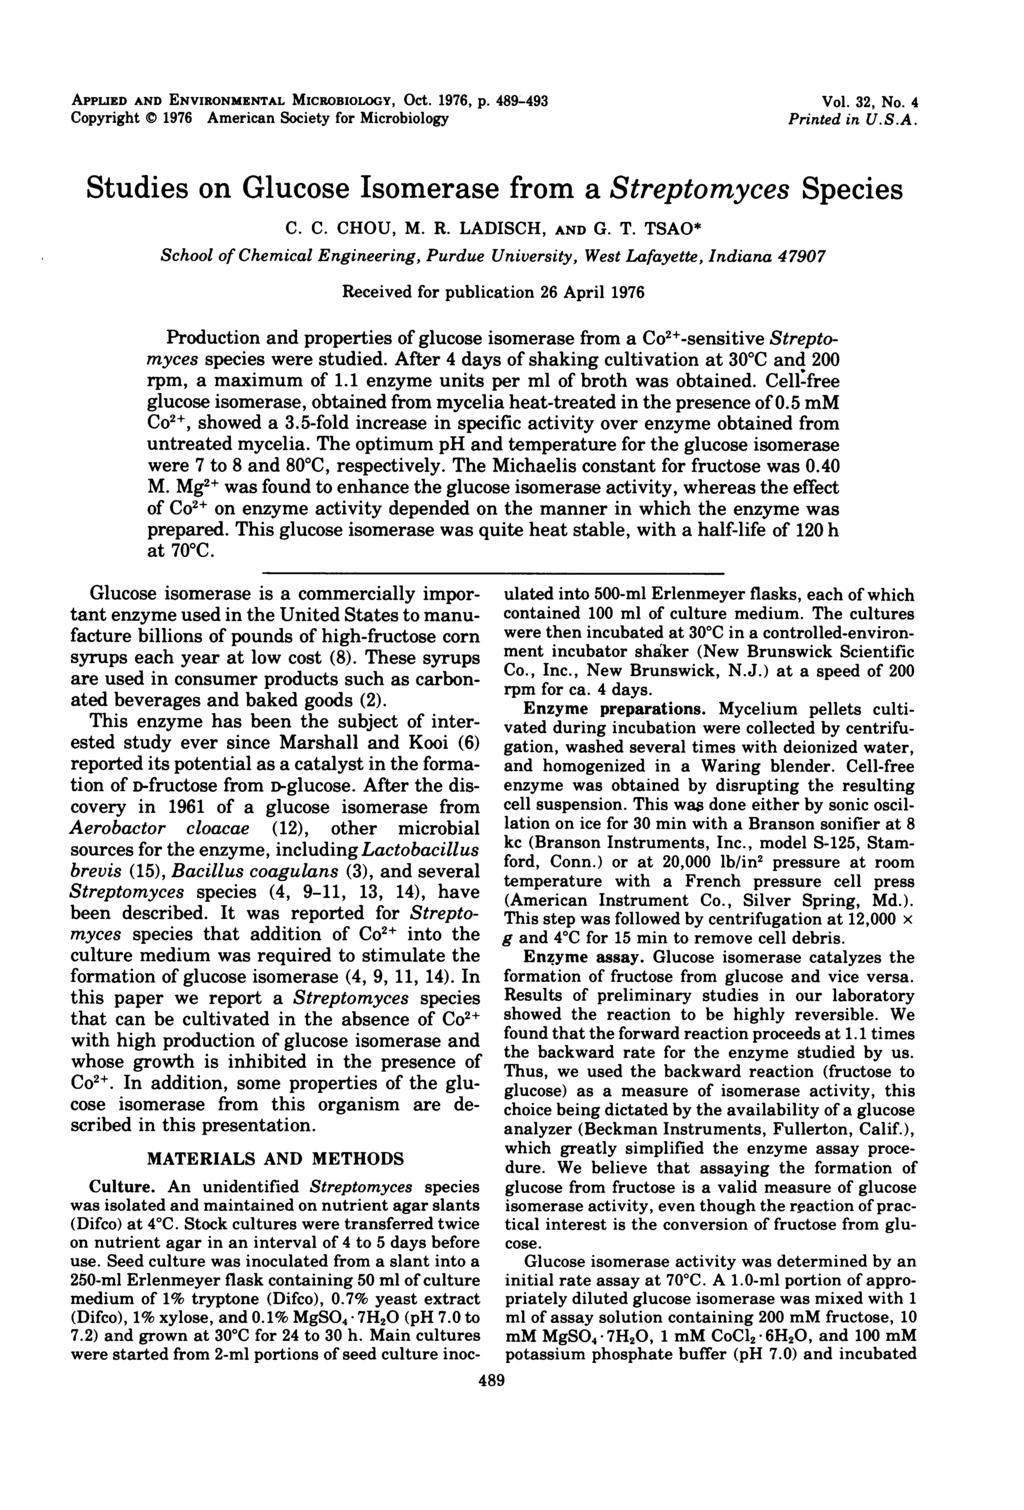 APPLIED AND ENVIRONMENTAL MICROBIOLOGY, Oct. 1976, P. 489-493 Copyright ) 1976 American Society for Microbiology Vol. 32, No. 4 Printed in U.S.A. Studies on Glucose Isomerase from a Streptomyces Species C.